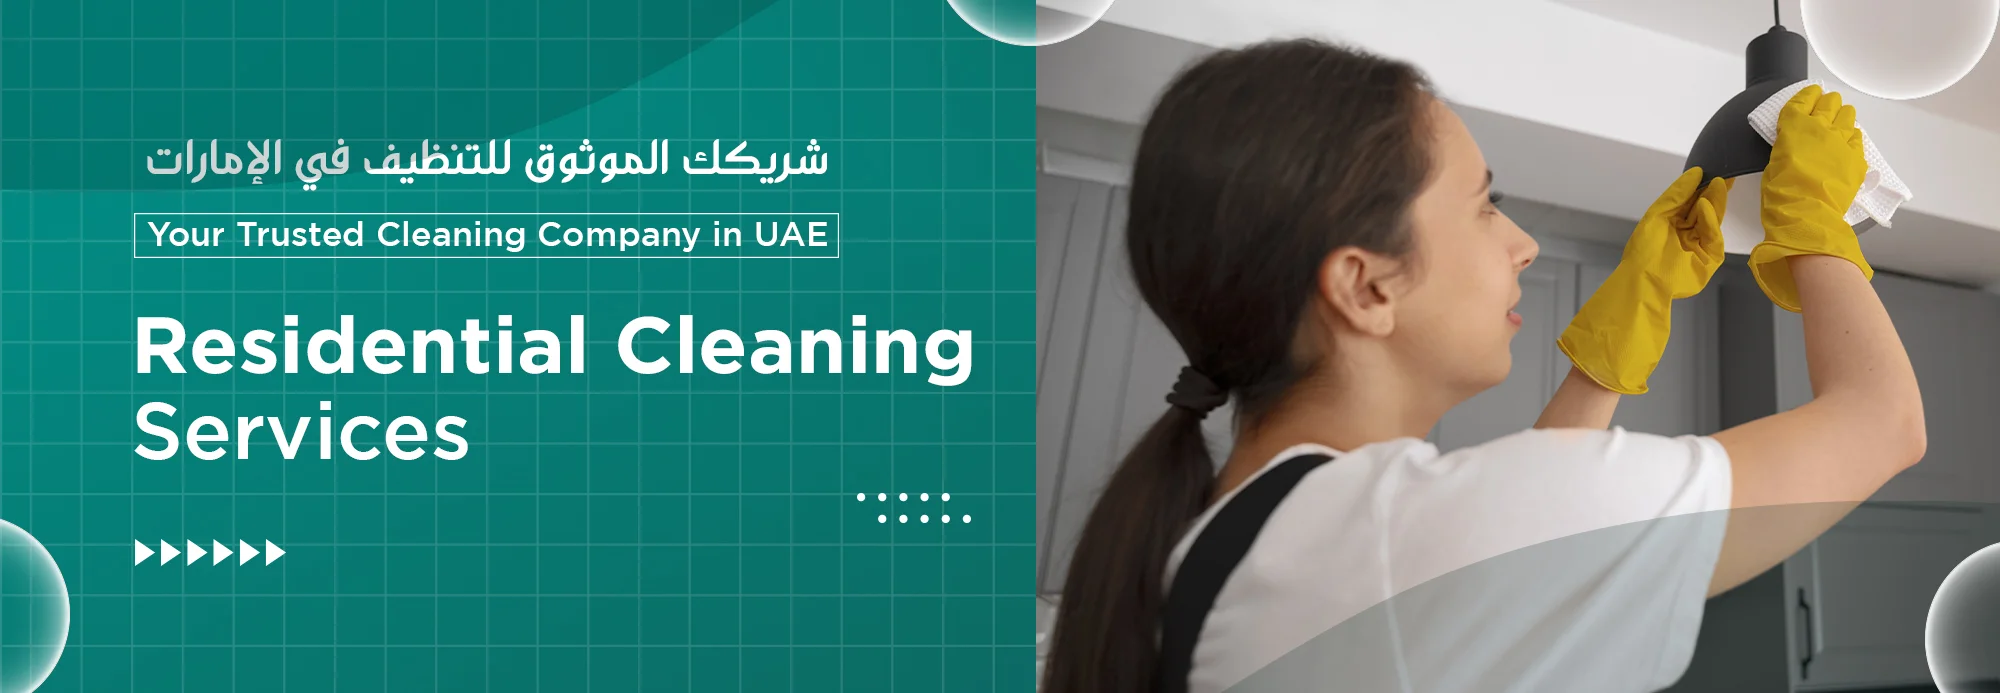 Residential Cleaning Service Dubai